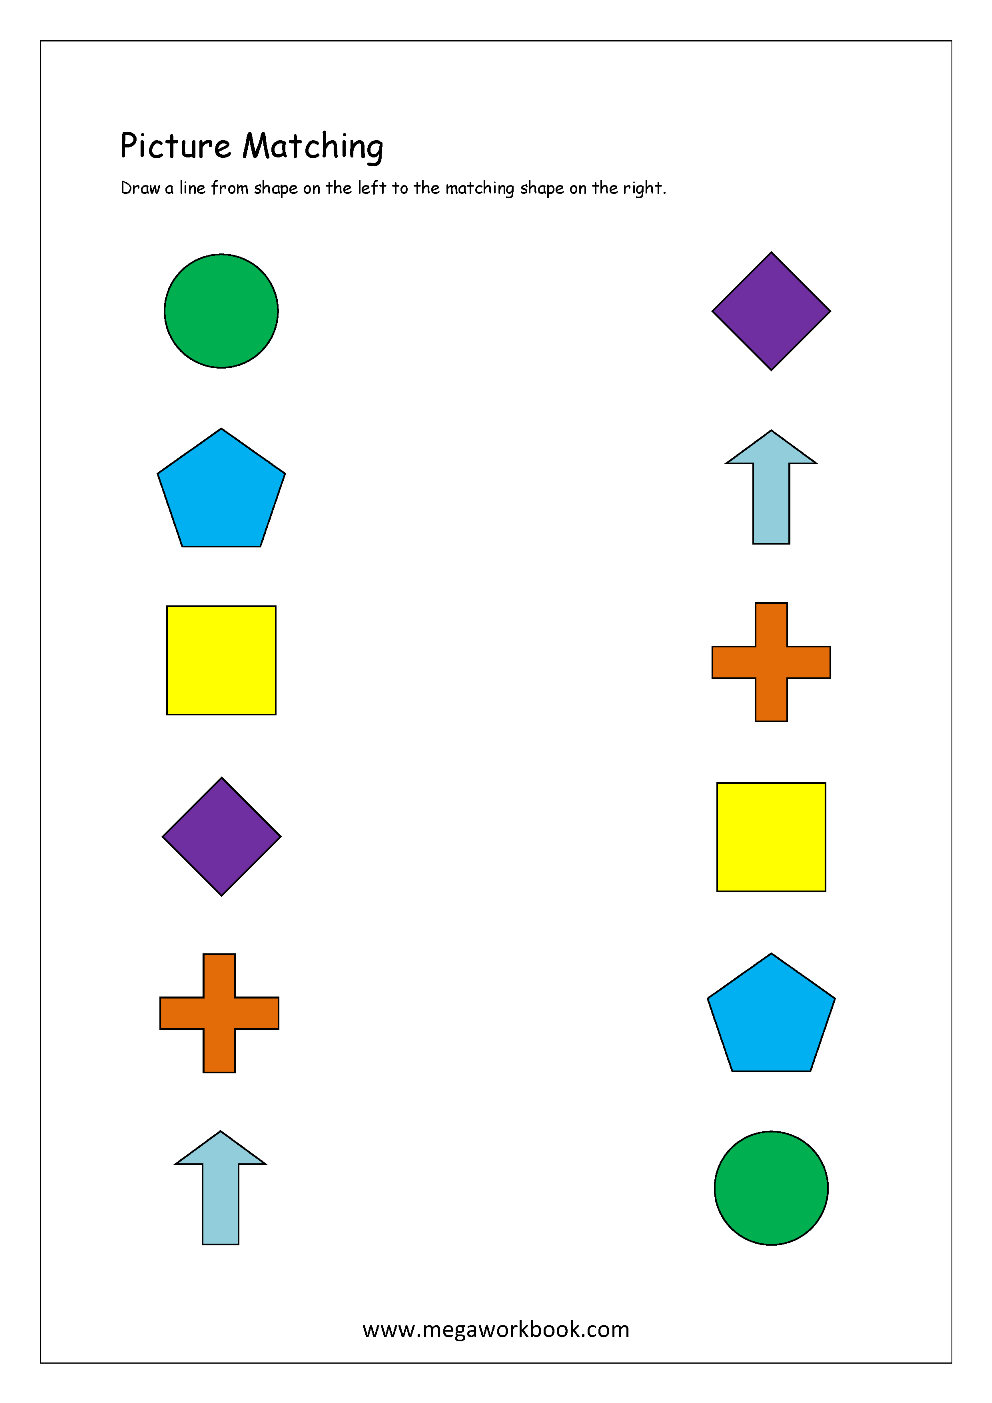 Picture Matching Worksheets For Preschool - Free Logical Thinking